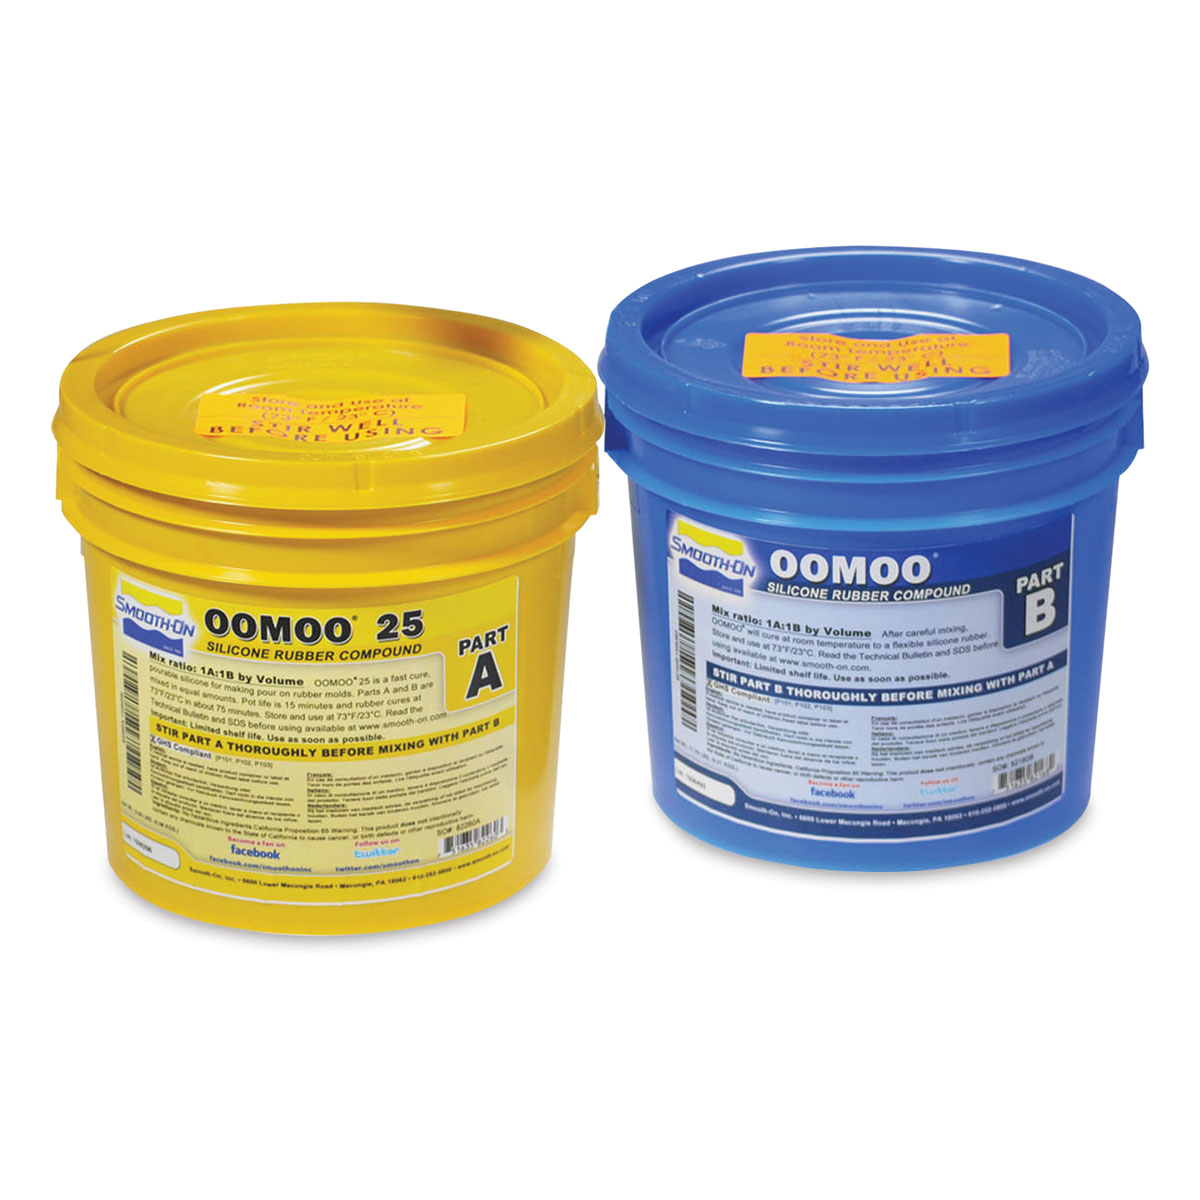 Smooth-On Oomoo Silicone Rubber